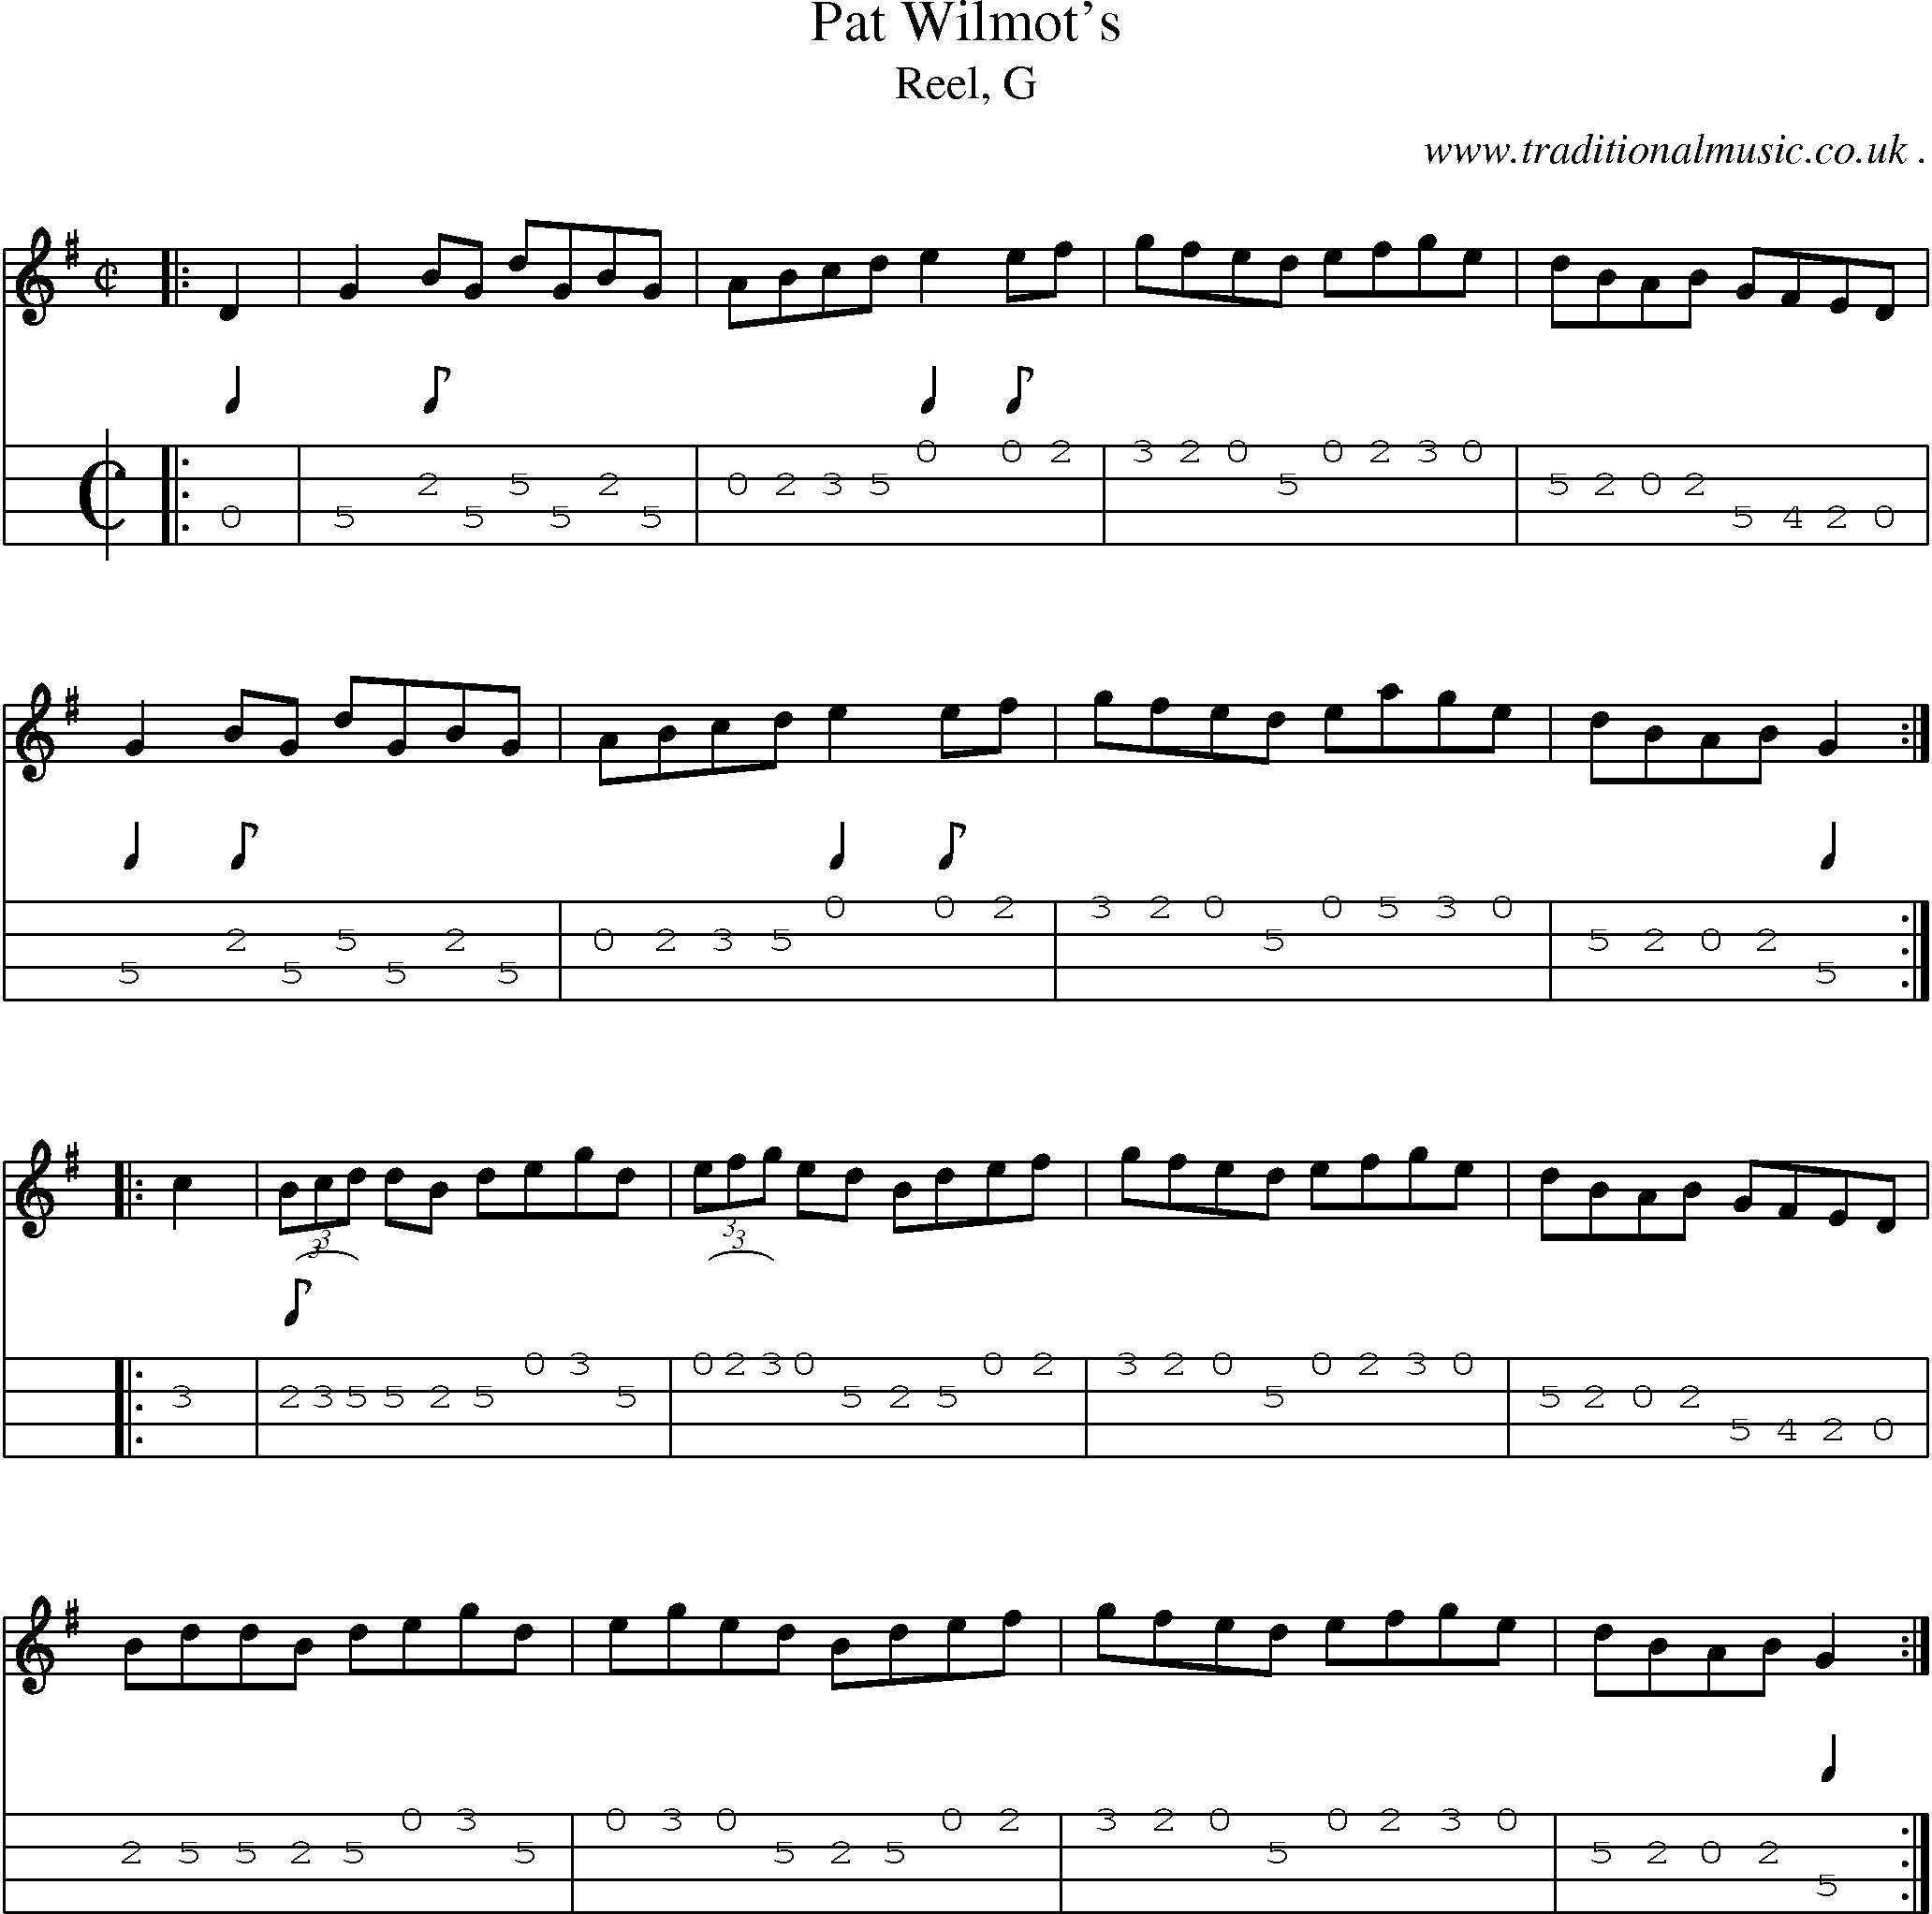 Sheet-music  score, Chords and Mandolin Tabs for Pat Wilmots